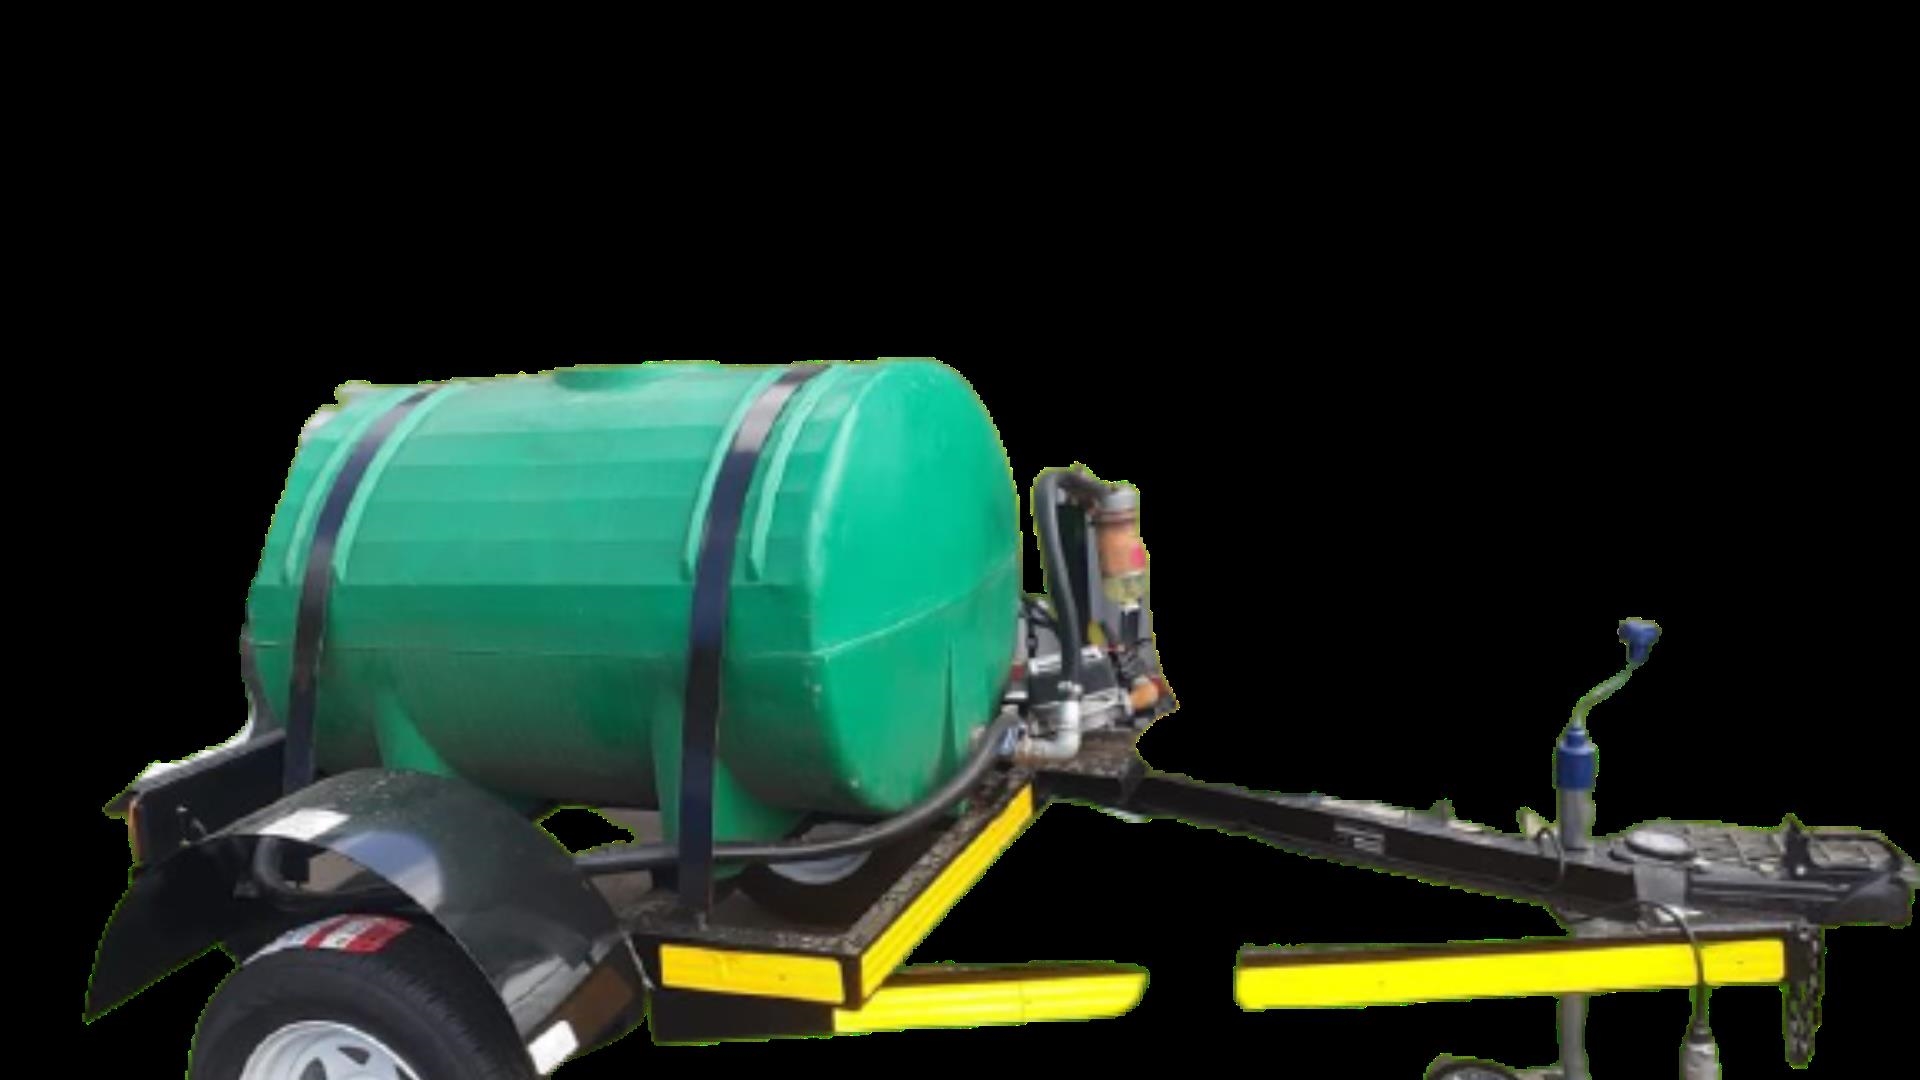 Custom Diesel bowser trailer 500 Litre Plastic Diesel Bowser Blk Friday Special 2021 for sale by Jikelele Tankers and Trailers   | Truck & Trailer Marketplaces